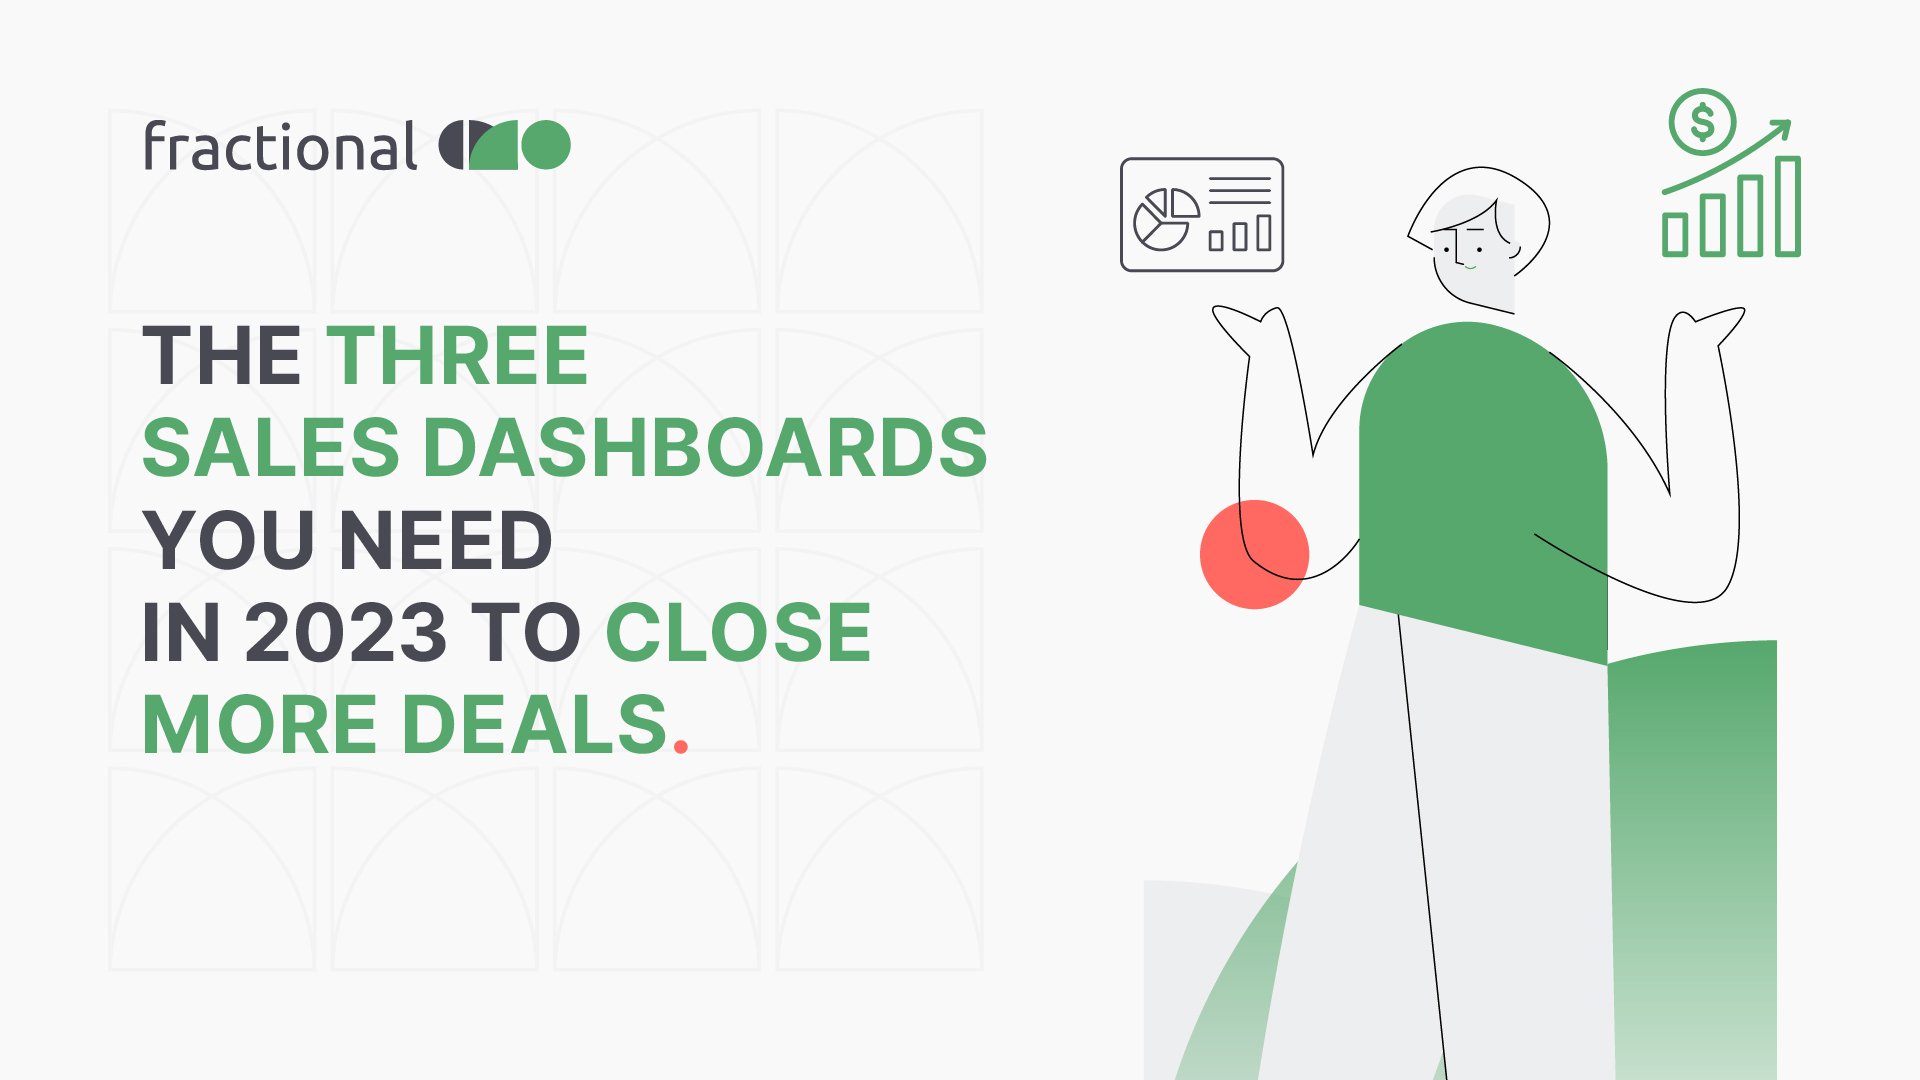 The 3 sales dashboards you need in 2023 to close more deals